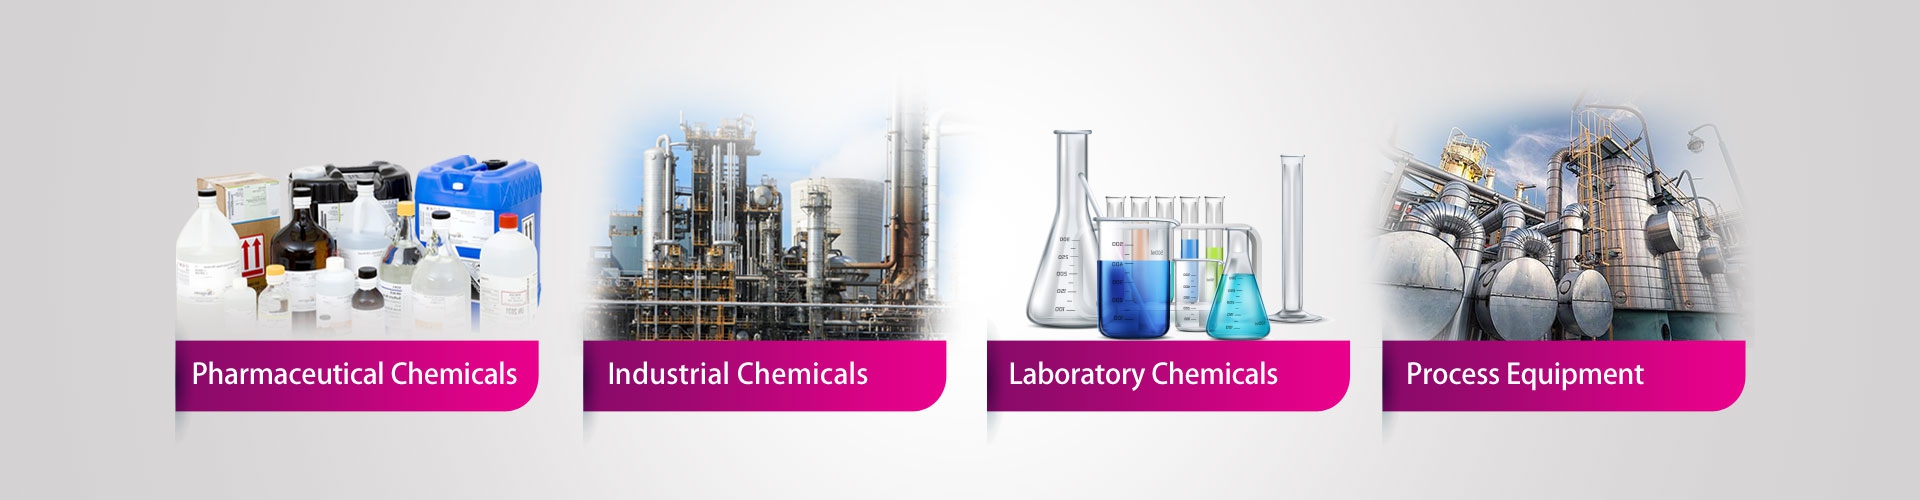 chemicals 003 - The 6th International Chemical Exhibition 2023 in Iran/Tehran